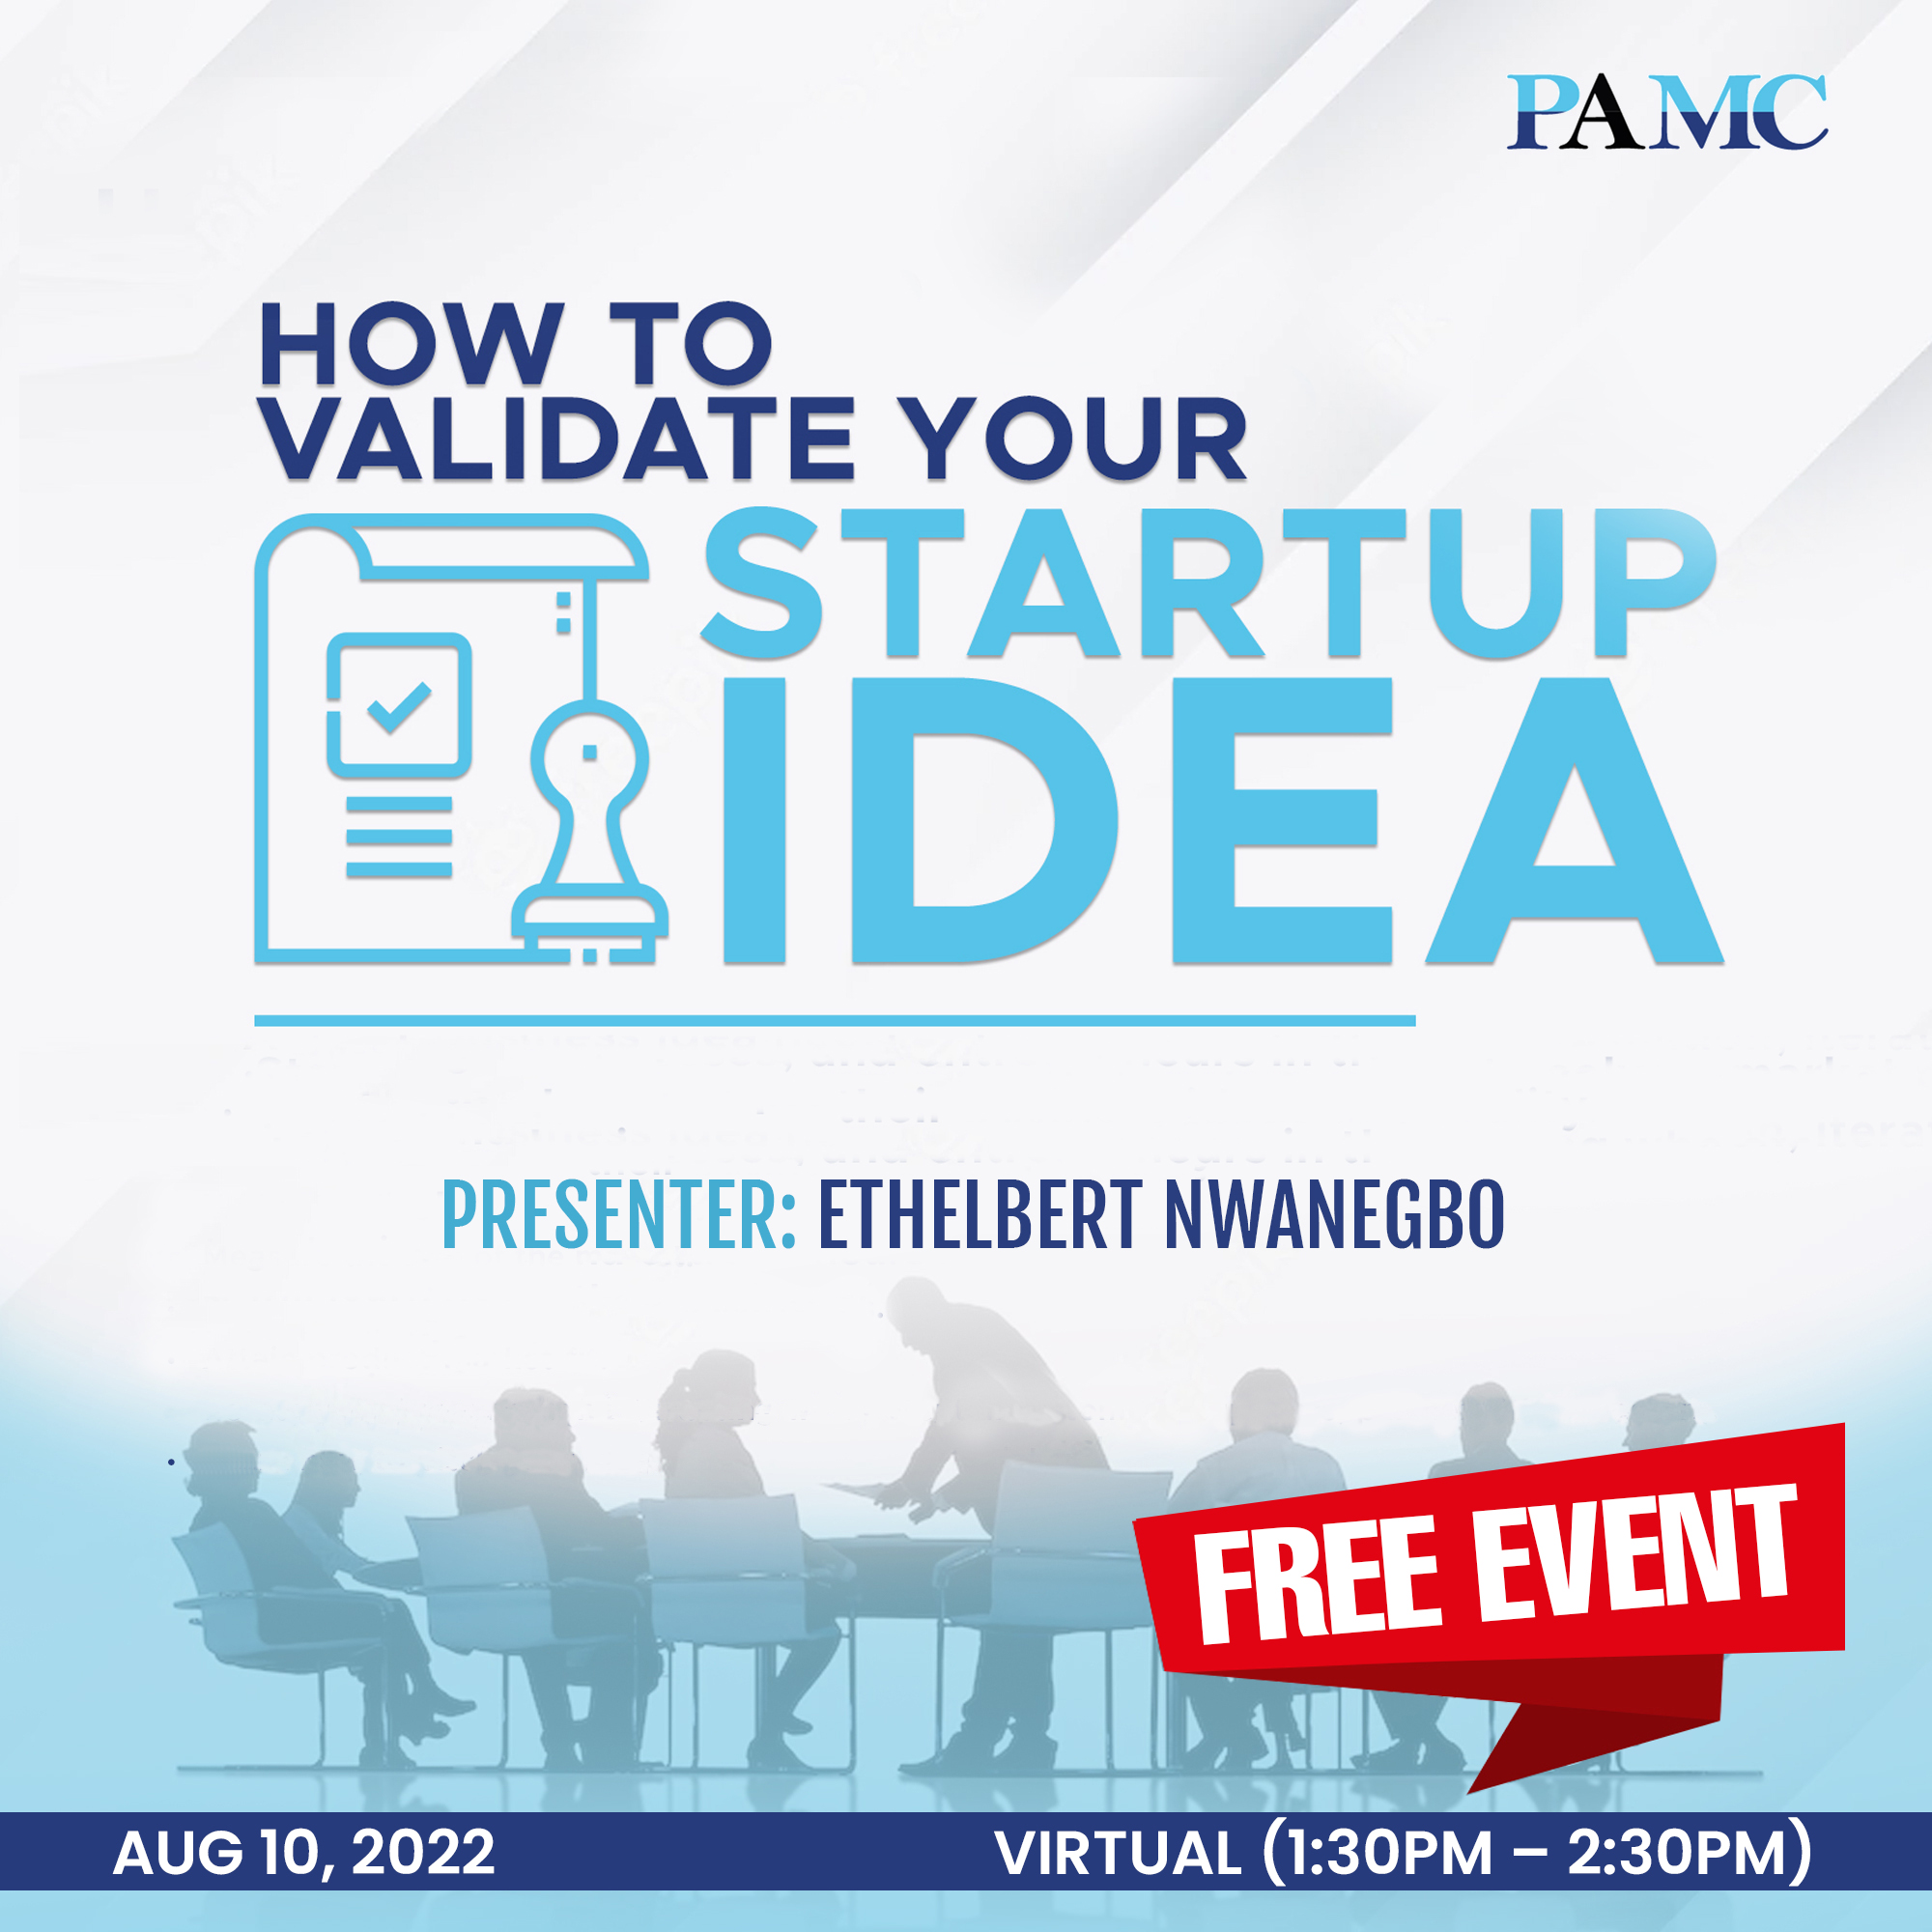 VALIDATE YOUR STARTUP IDEA